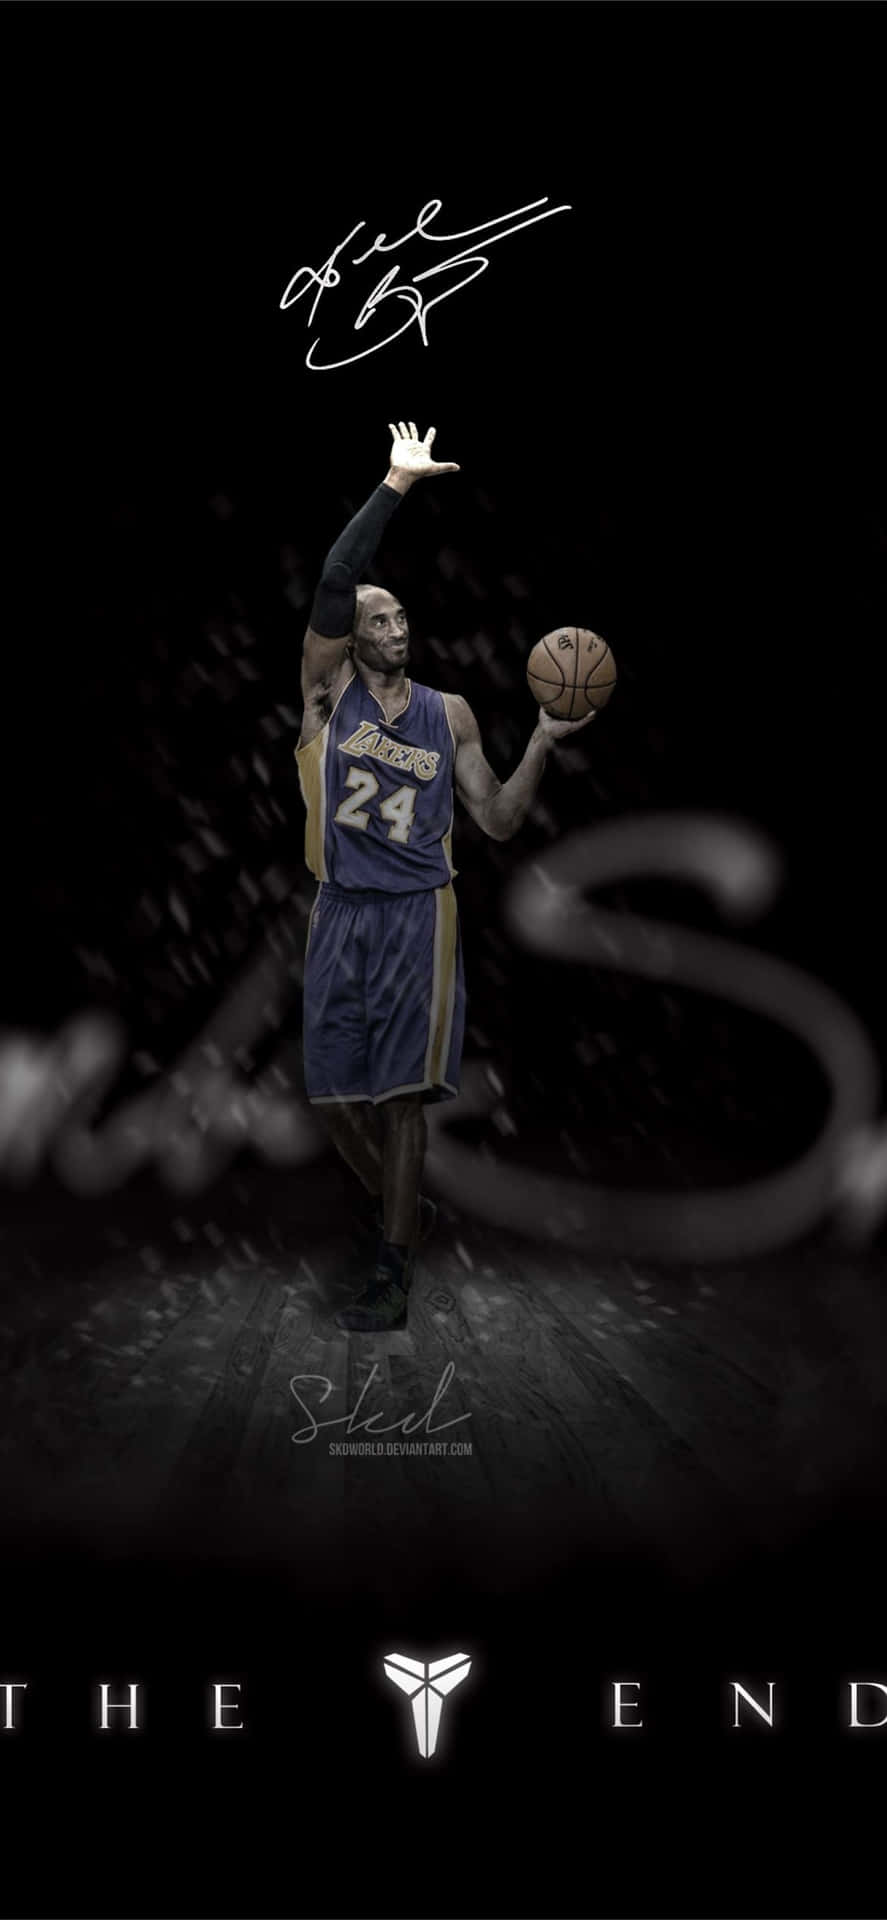 Kobebryant Dribblar Bollen Under En Match. (note: Since There Is No Specific Context Provided For The Wallpaper, This Translation Assumes The Sentence Is Describing A Wallpaper Featuring Kobe Bryant Dribbling The Ball During A Basketball Game.) Wallpaper